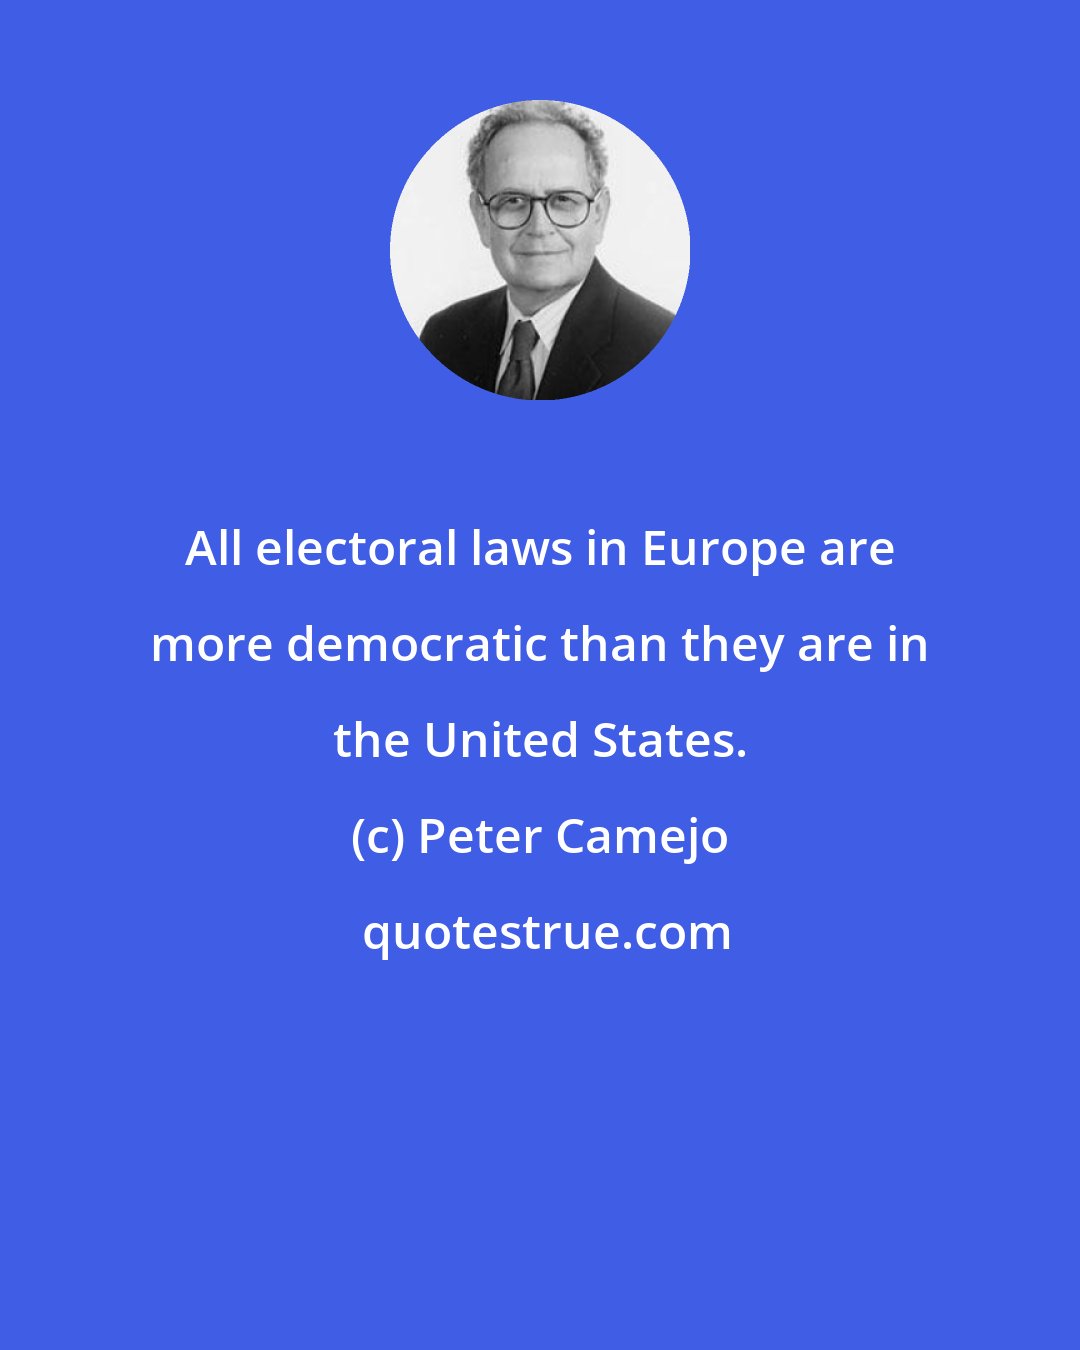 Peter Camejo: All electoral laws in Europe are more democratic than they are in the United States.